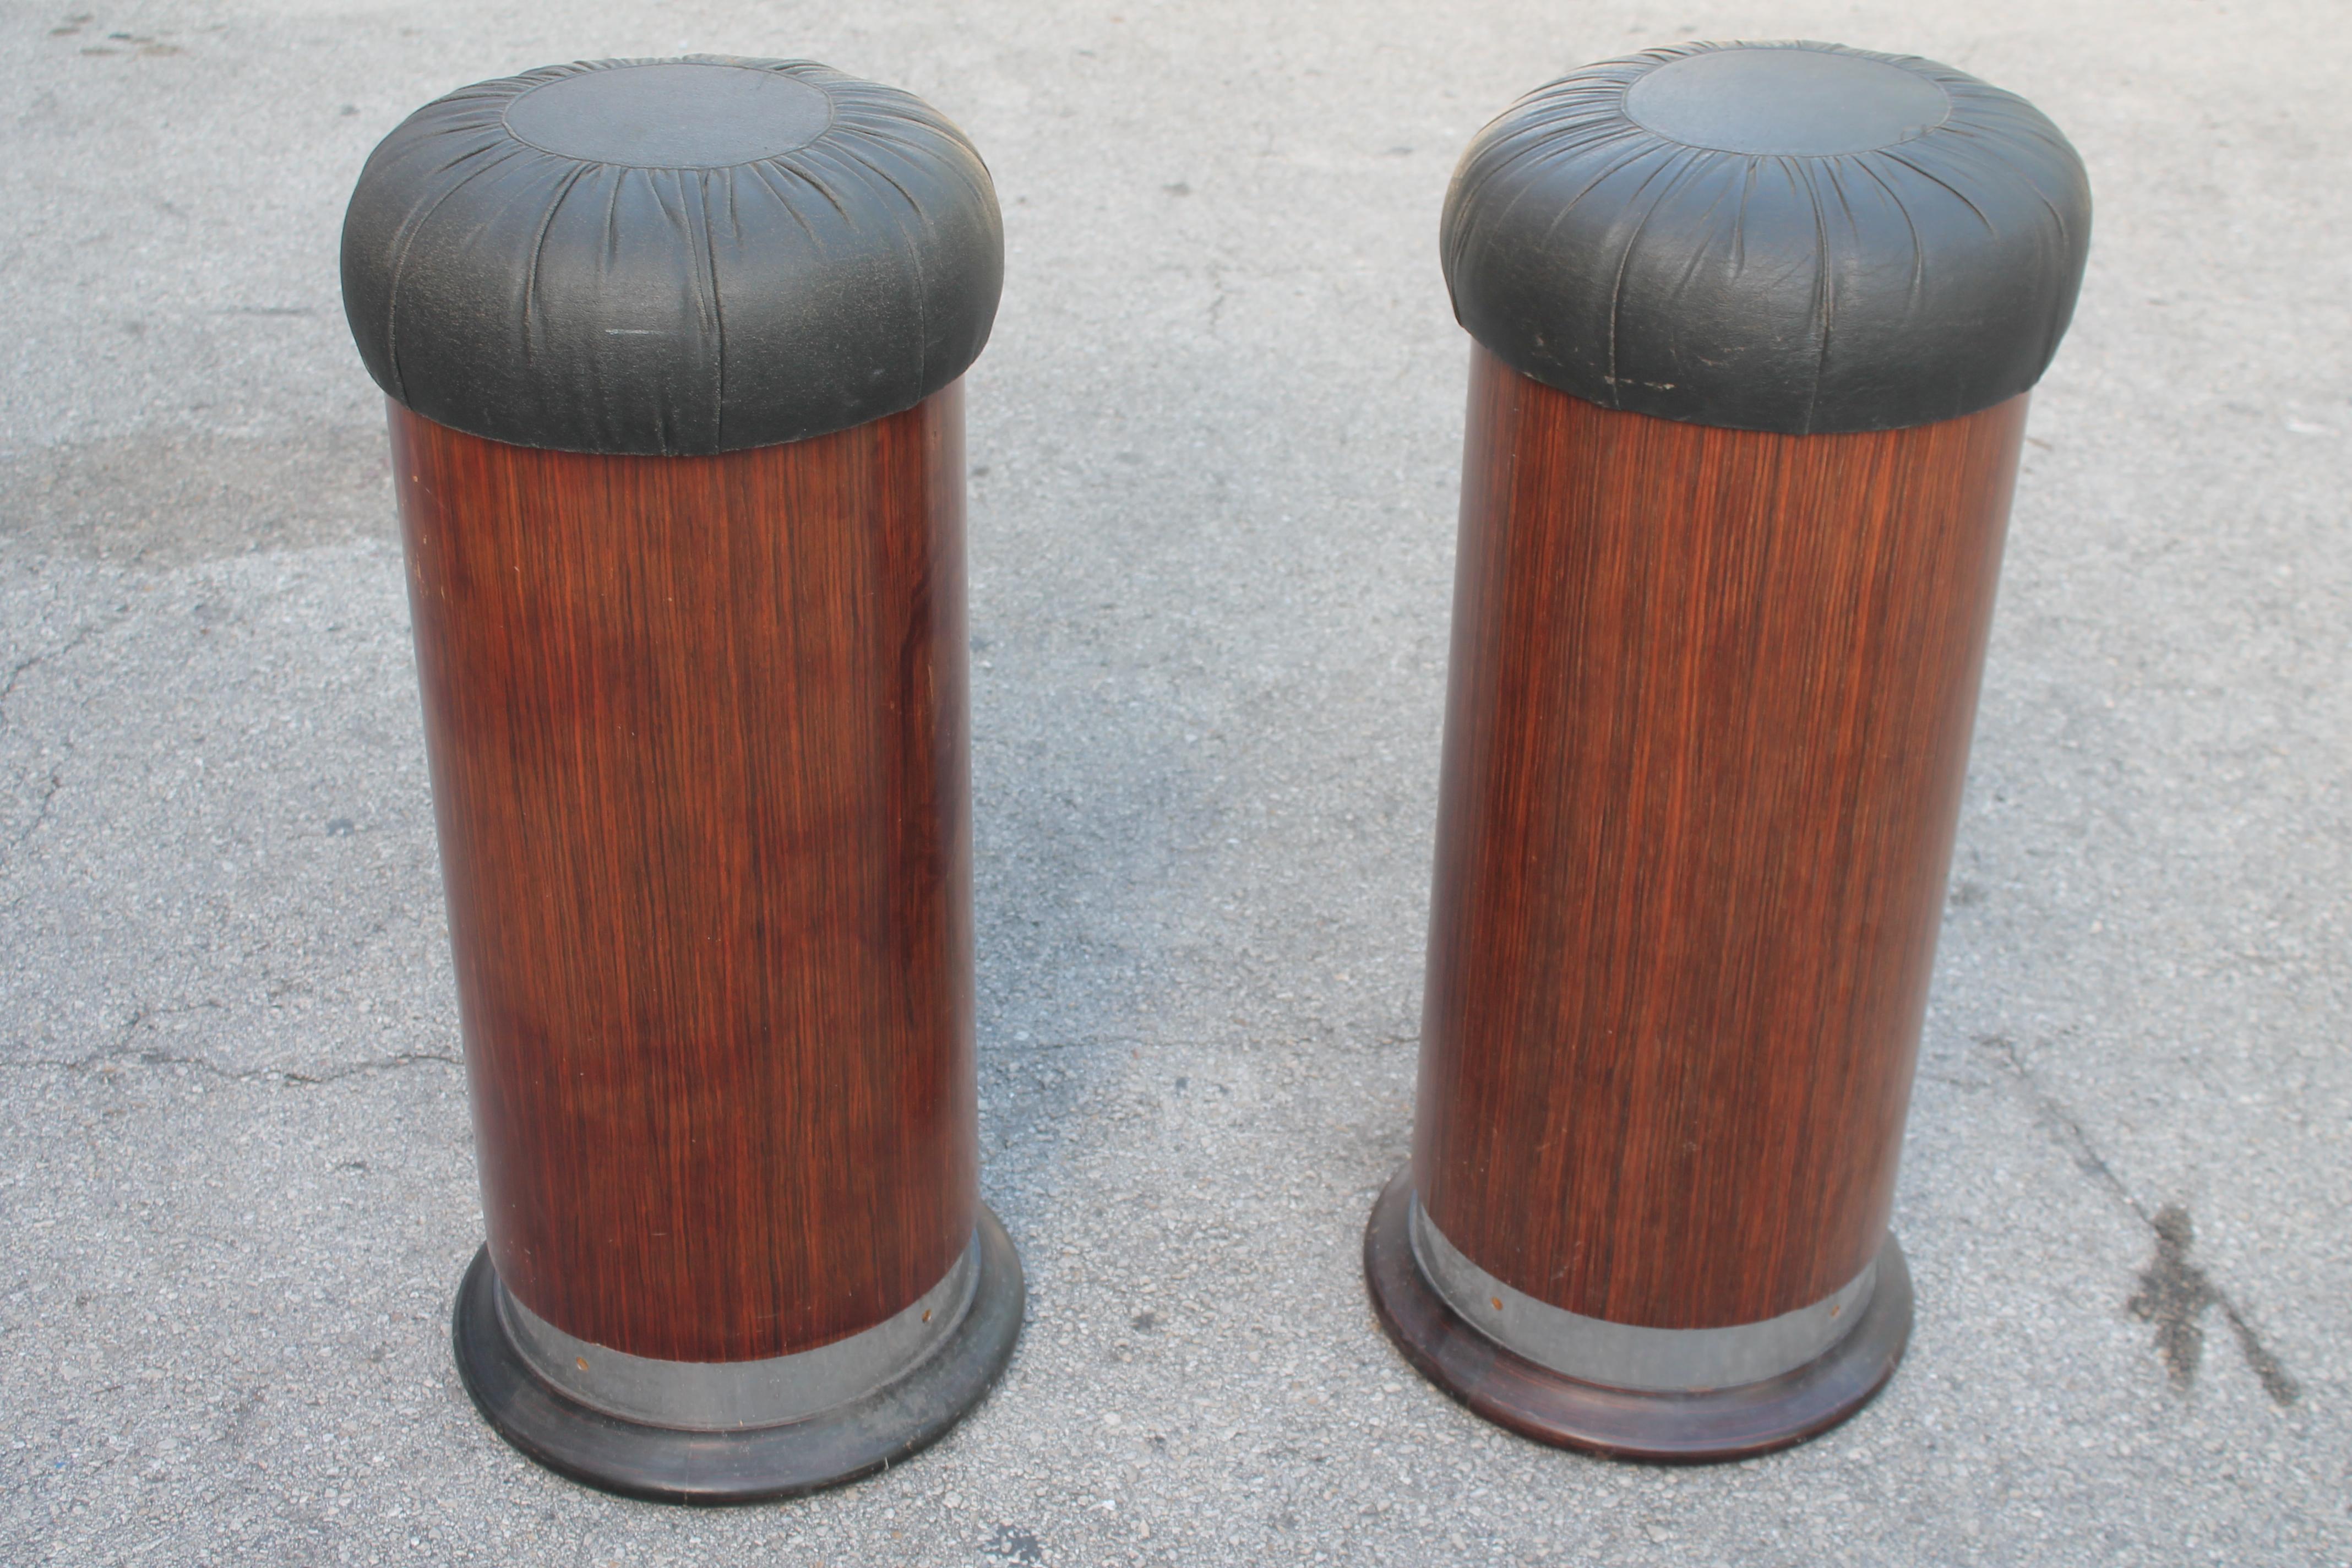 Pair Spectacular French Art Deco Exotic Macassar Ebony Barstools. Black leather seat. This is a very rare pair of Macassar Ebony Bar Stools. French Estate.